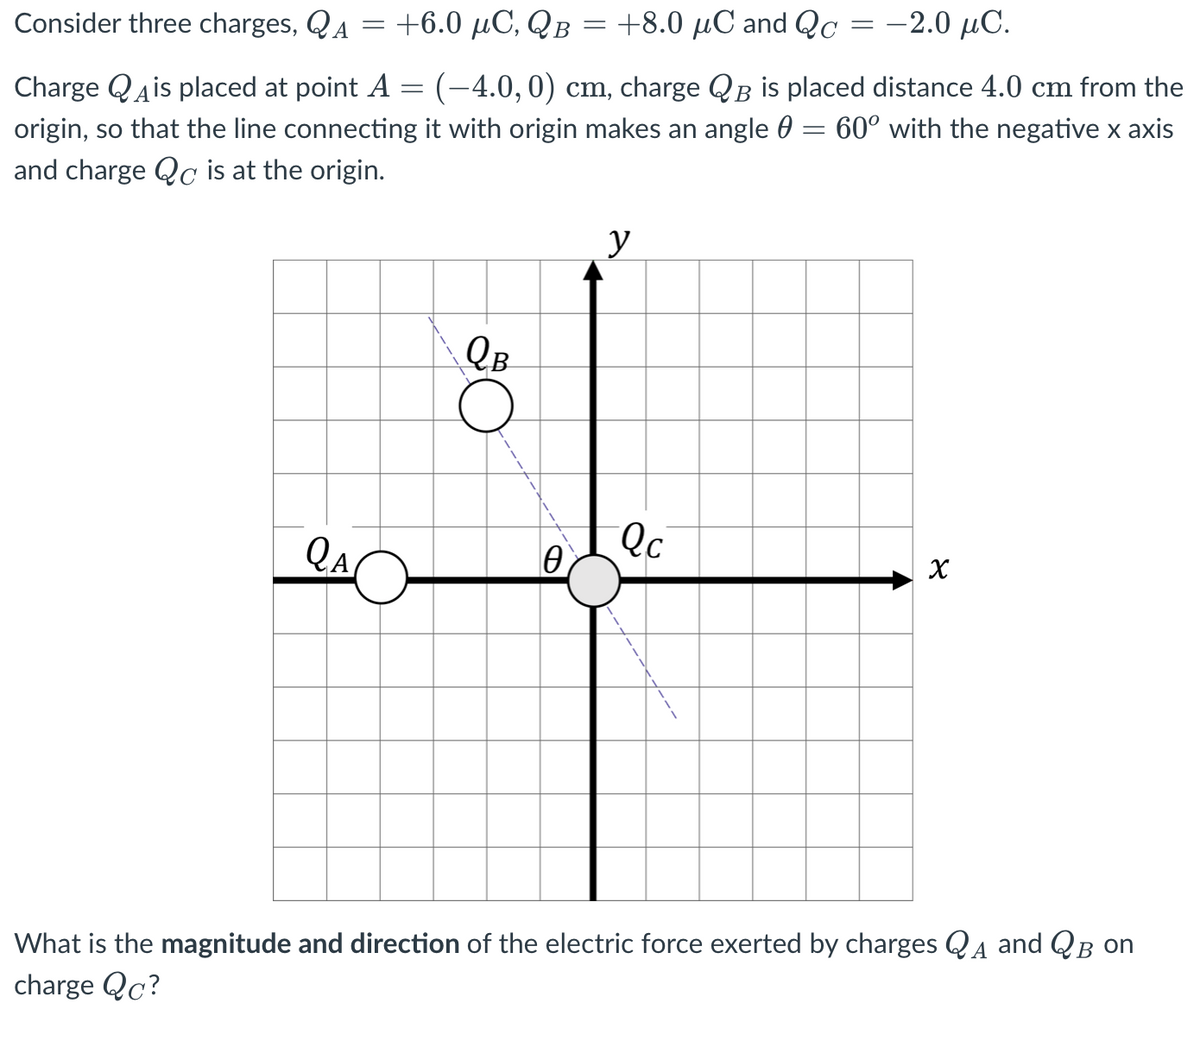 +8.0 µC and Qc = -2.0 µC.
Consider three charges, QA = +6.0 µC, QB
Charge Qais placed at point A = (-4.0,0) cm, charge QB is placed distance 4.0 cm from the
origin, so that the line connecting it with origin makes an angle 0 = 60° with the negative x axis
and charge Qc is at the origin.
y
QB
QA
What is the magnitude and direction of the electric force exerted by charges QA and QB on
charge Qc?
